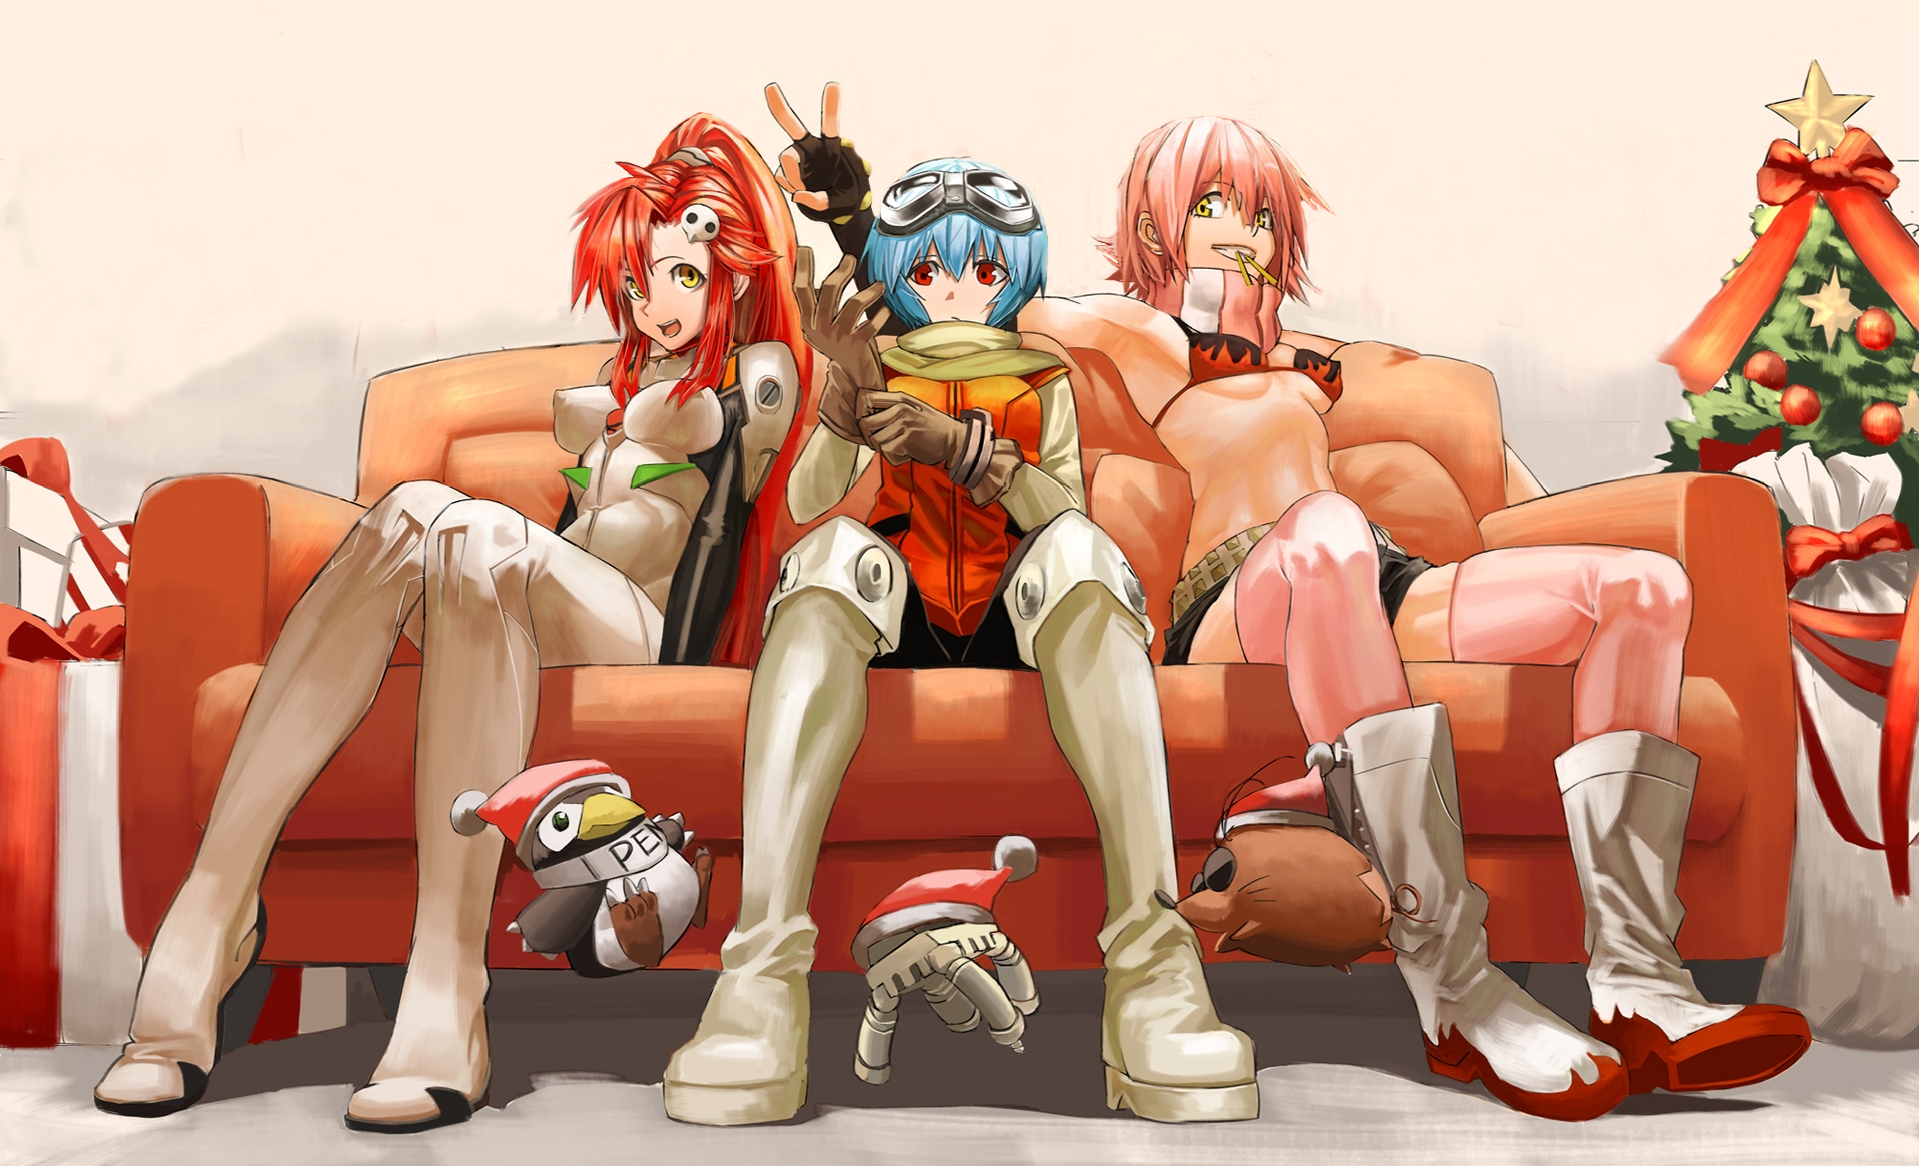 Anime 1919x1166 FLCL Tengen Toppa Gurren Lagann Neon Genesis Evangelion Littner Yoko Haruhara Haruko Ayanami Rei sitting couch group of women frontal view boobs belly tight clothing ponytail goggles boots Christmas tree hat women women indoors peace sign hand gesture smiling indoors anime anime girls women trio crossover